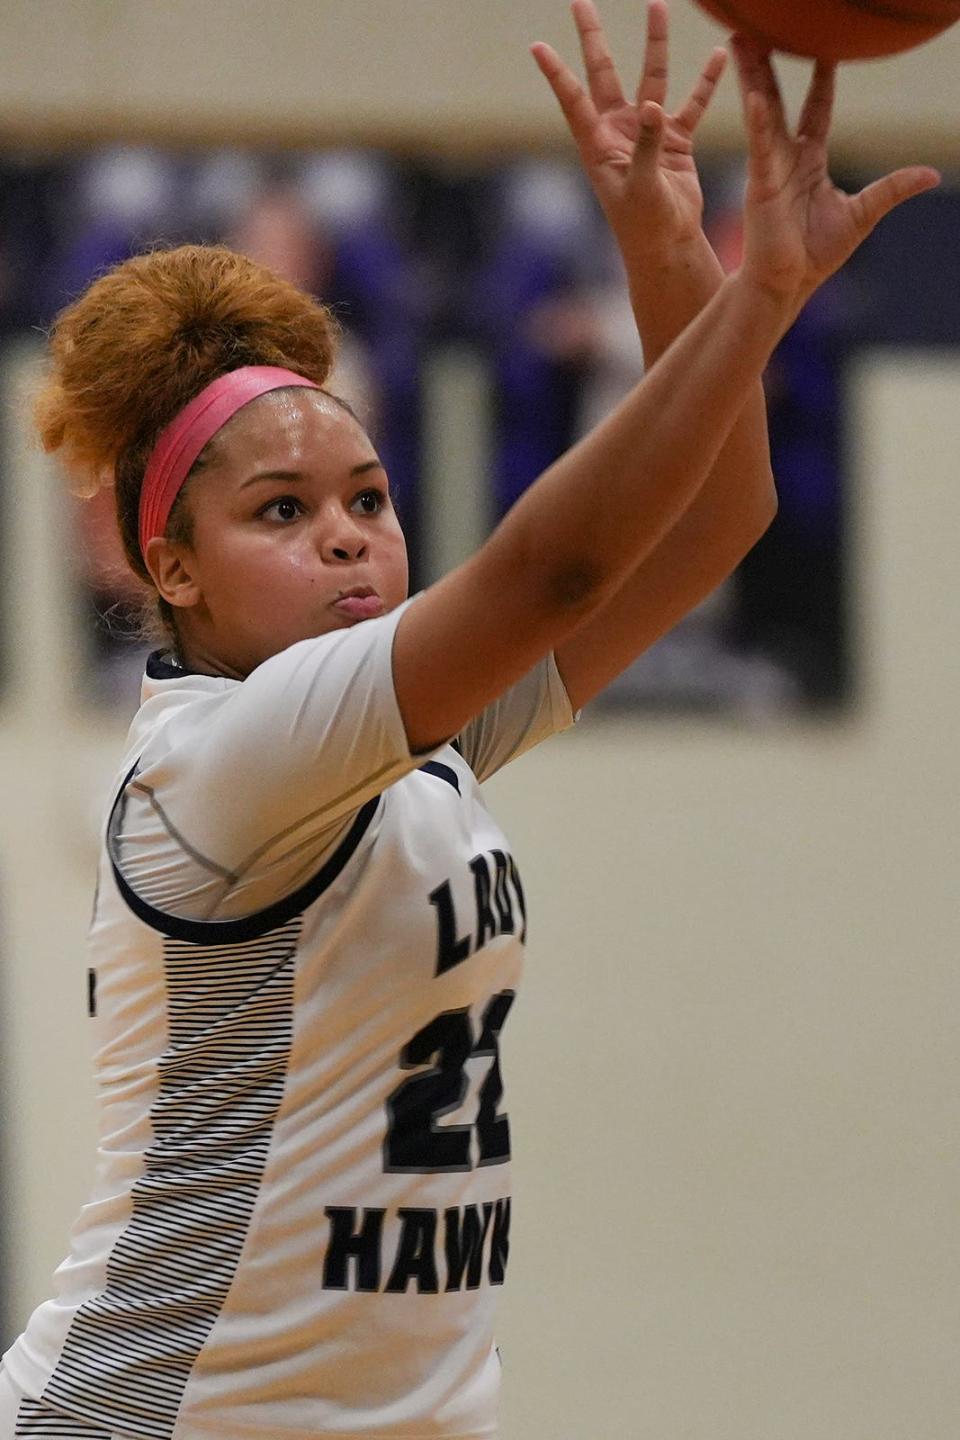 Hendrickson basketball player Tatyanna Bailey made a courageous return to the court after brain surgery in December. She passed away Friday at age 17 from cancer. Bailey received the Statesman's Courage Award at its annual preps banquet in June.